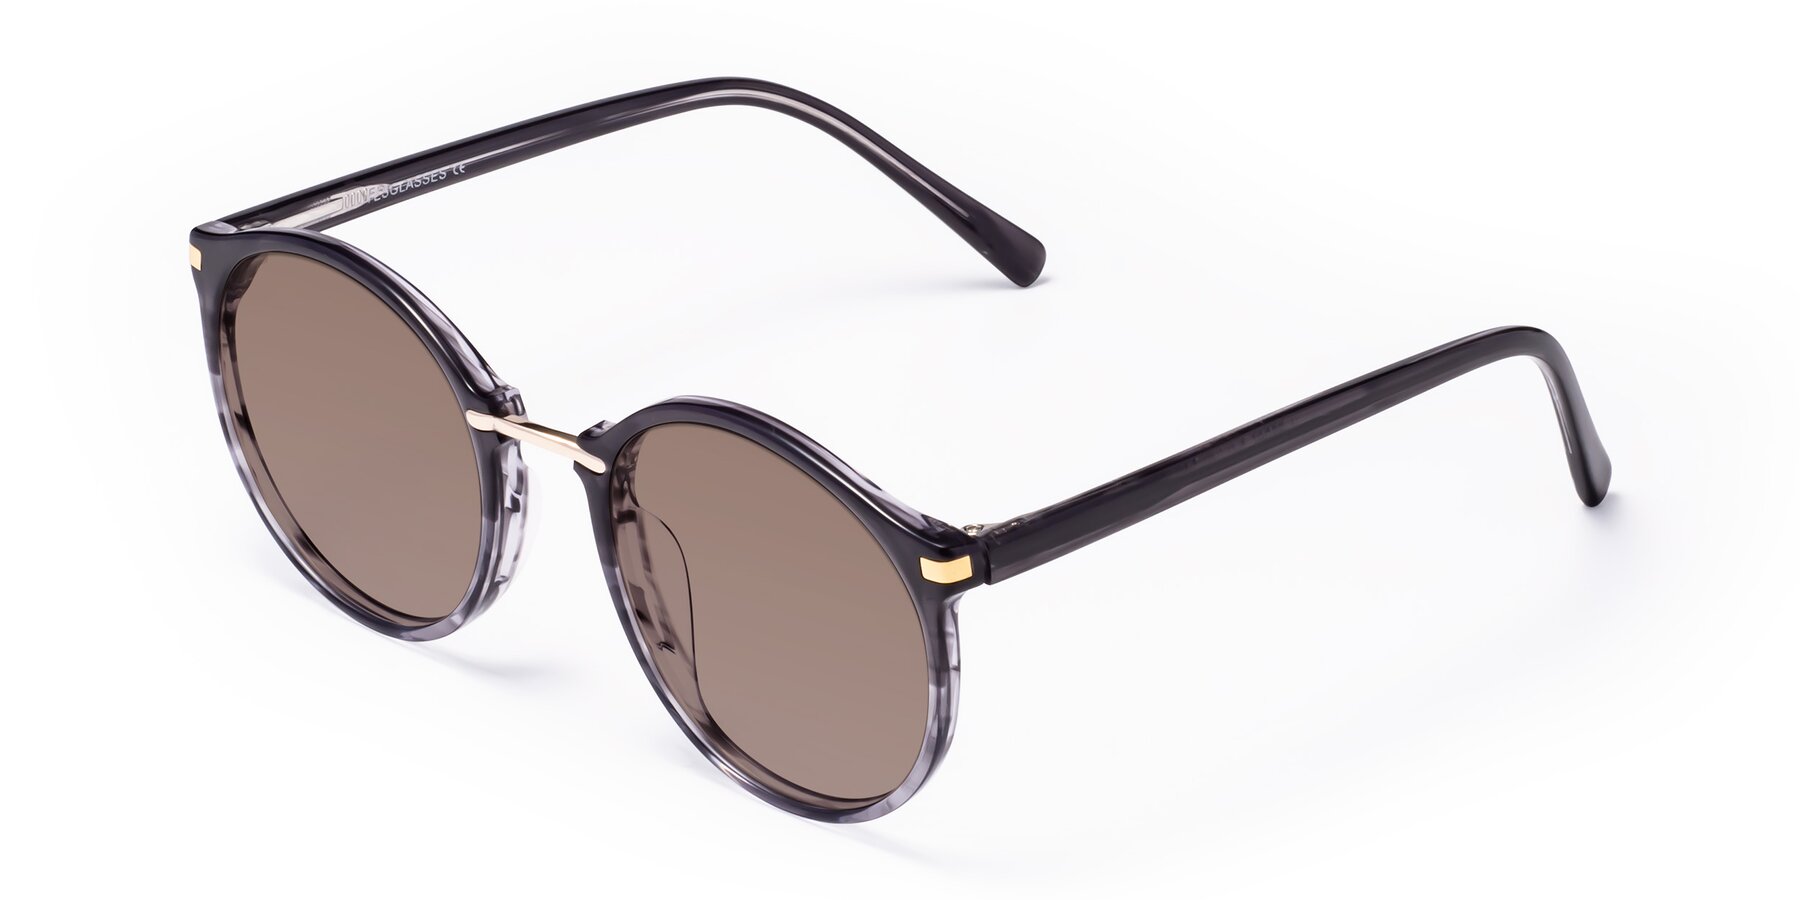 Angle of Casper in Translucent Black with Medium Brown Tinted Lenses